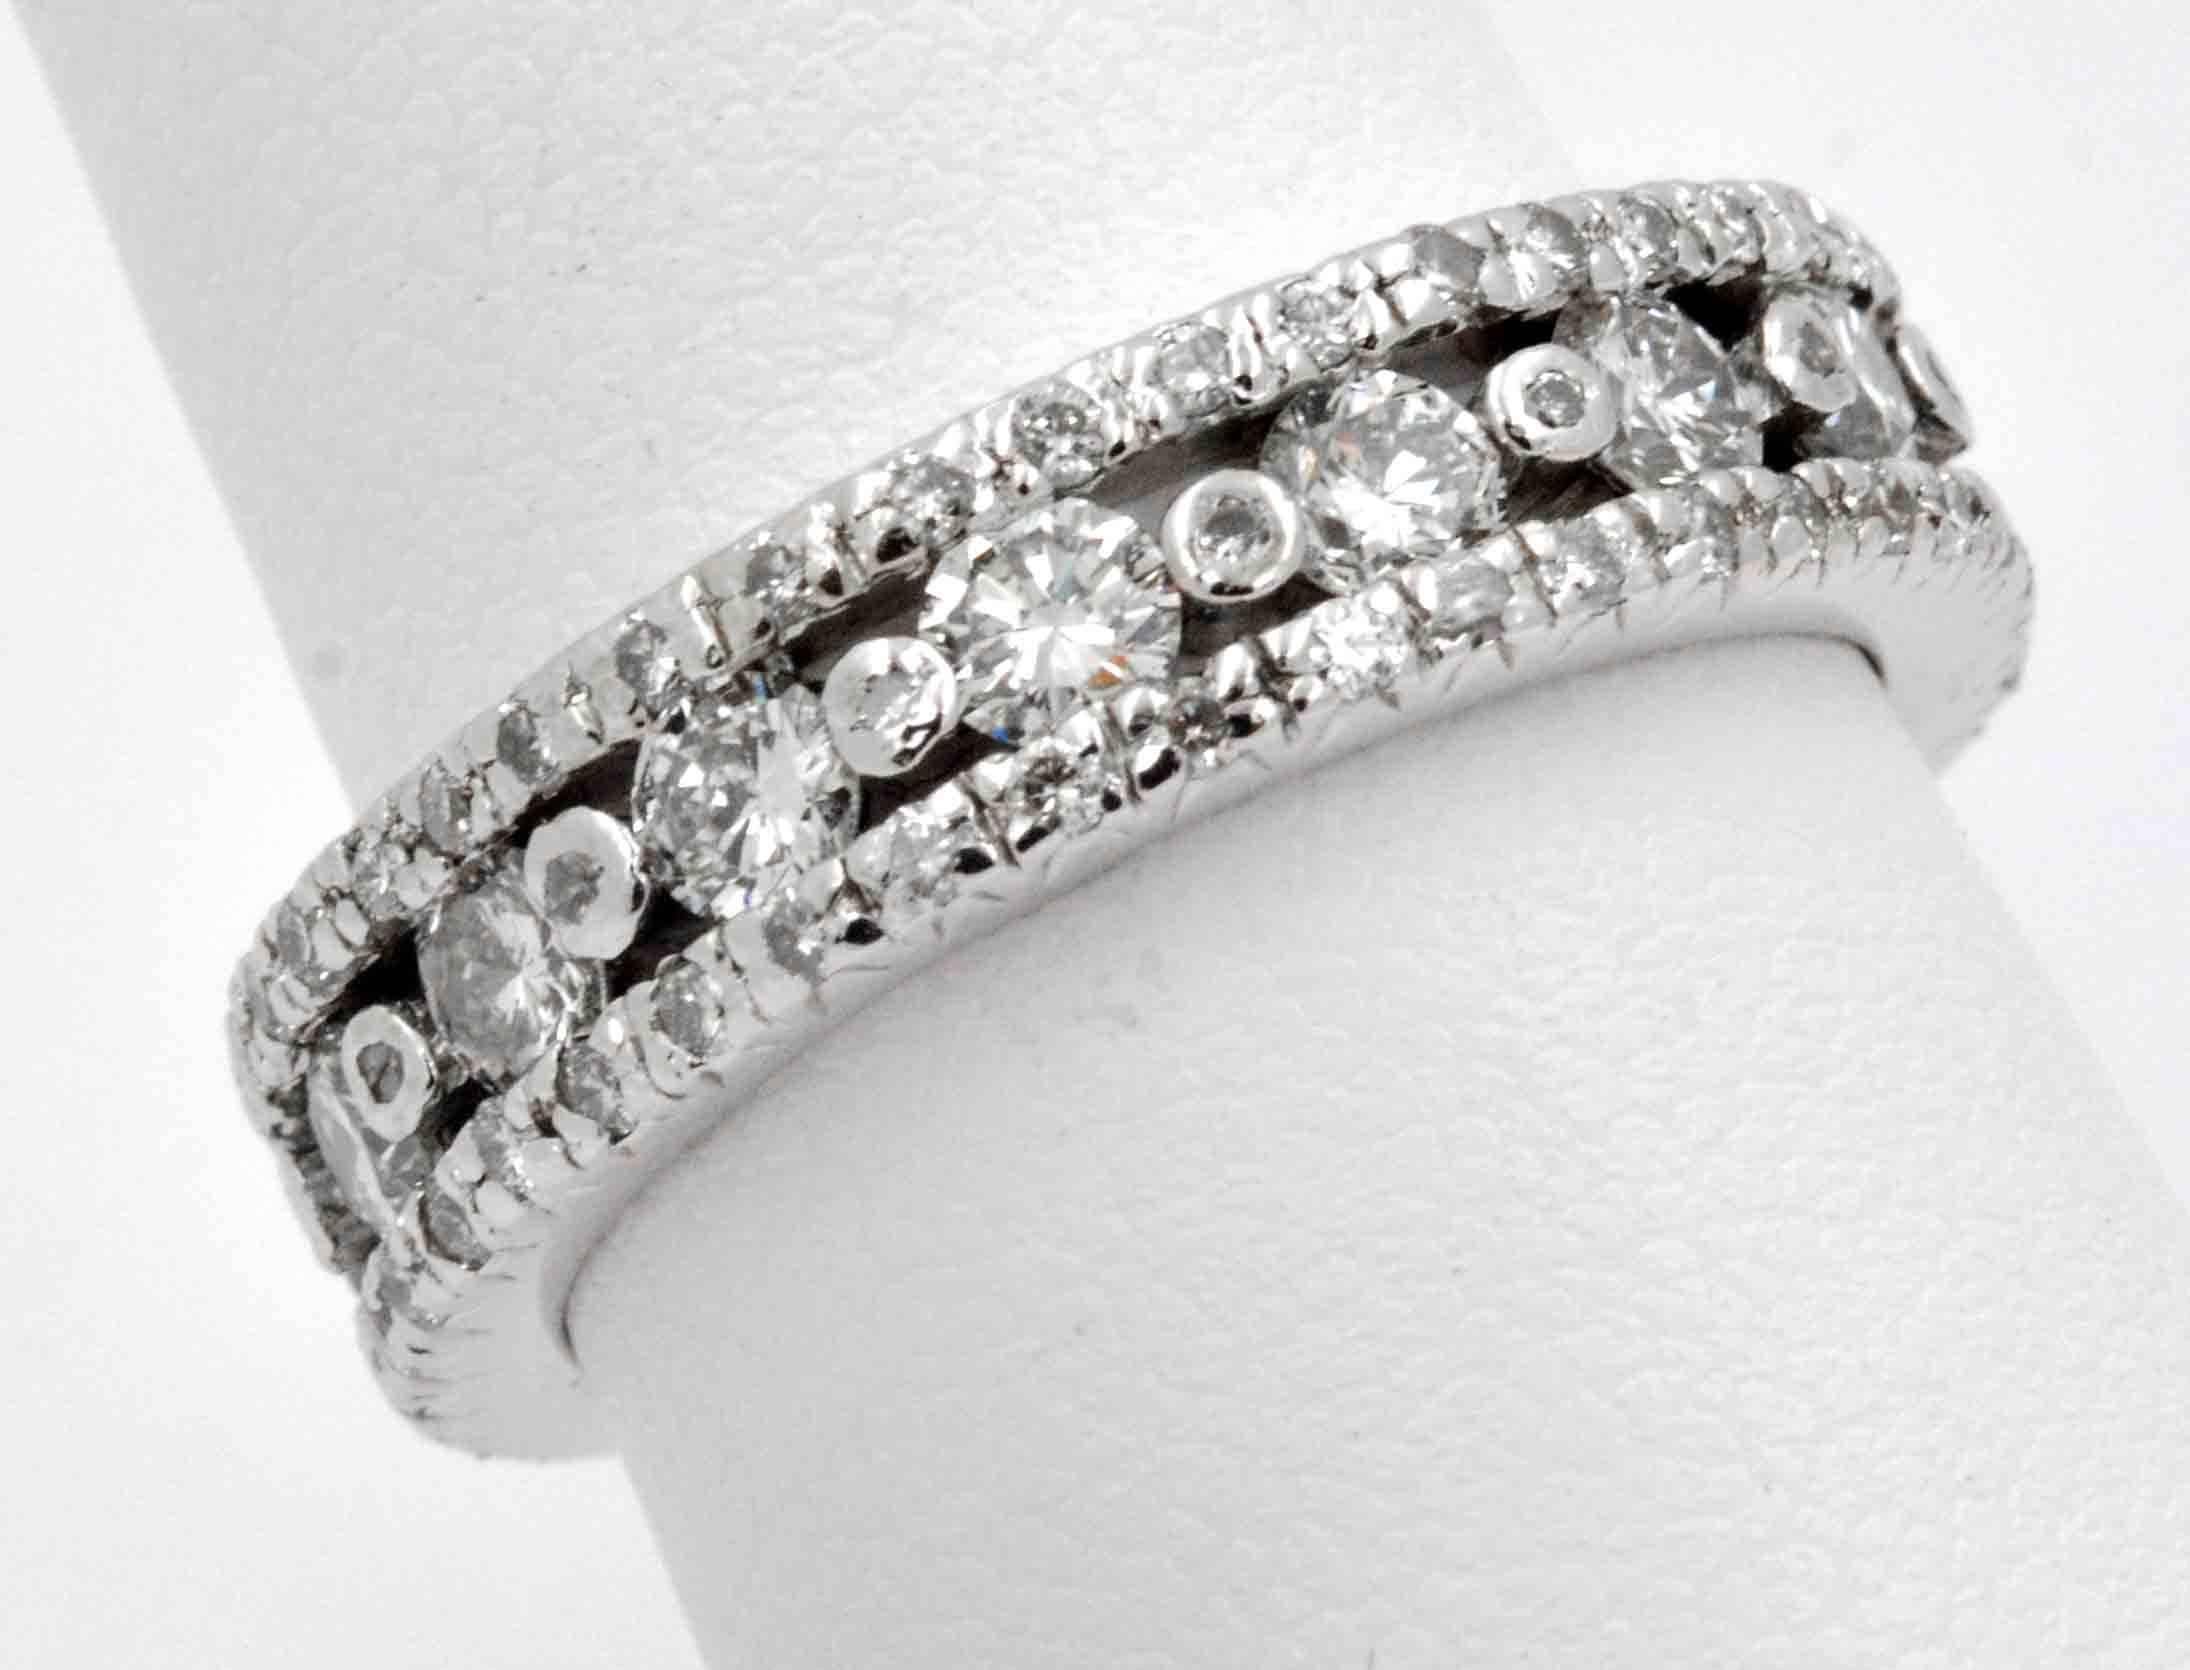 A luxurious 2.24 ct (total weight) sprinkling of diamonds are impressively set in an 18kt white gold eternity band.  This 18 kt white gold ring has intricate rows of round brilliant cut diamonds (G-H color and VS clarity), crafted in a glitzy